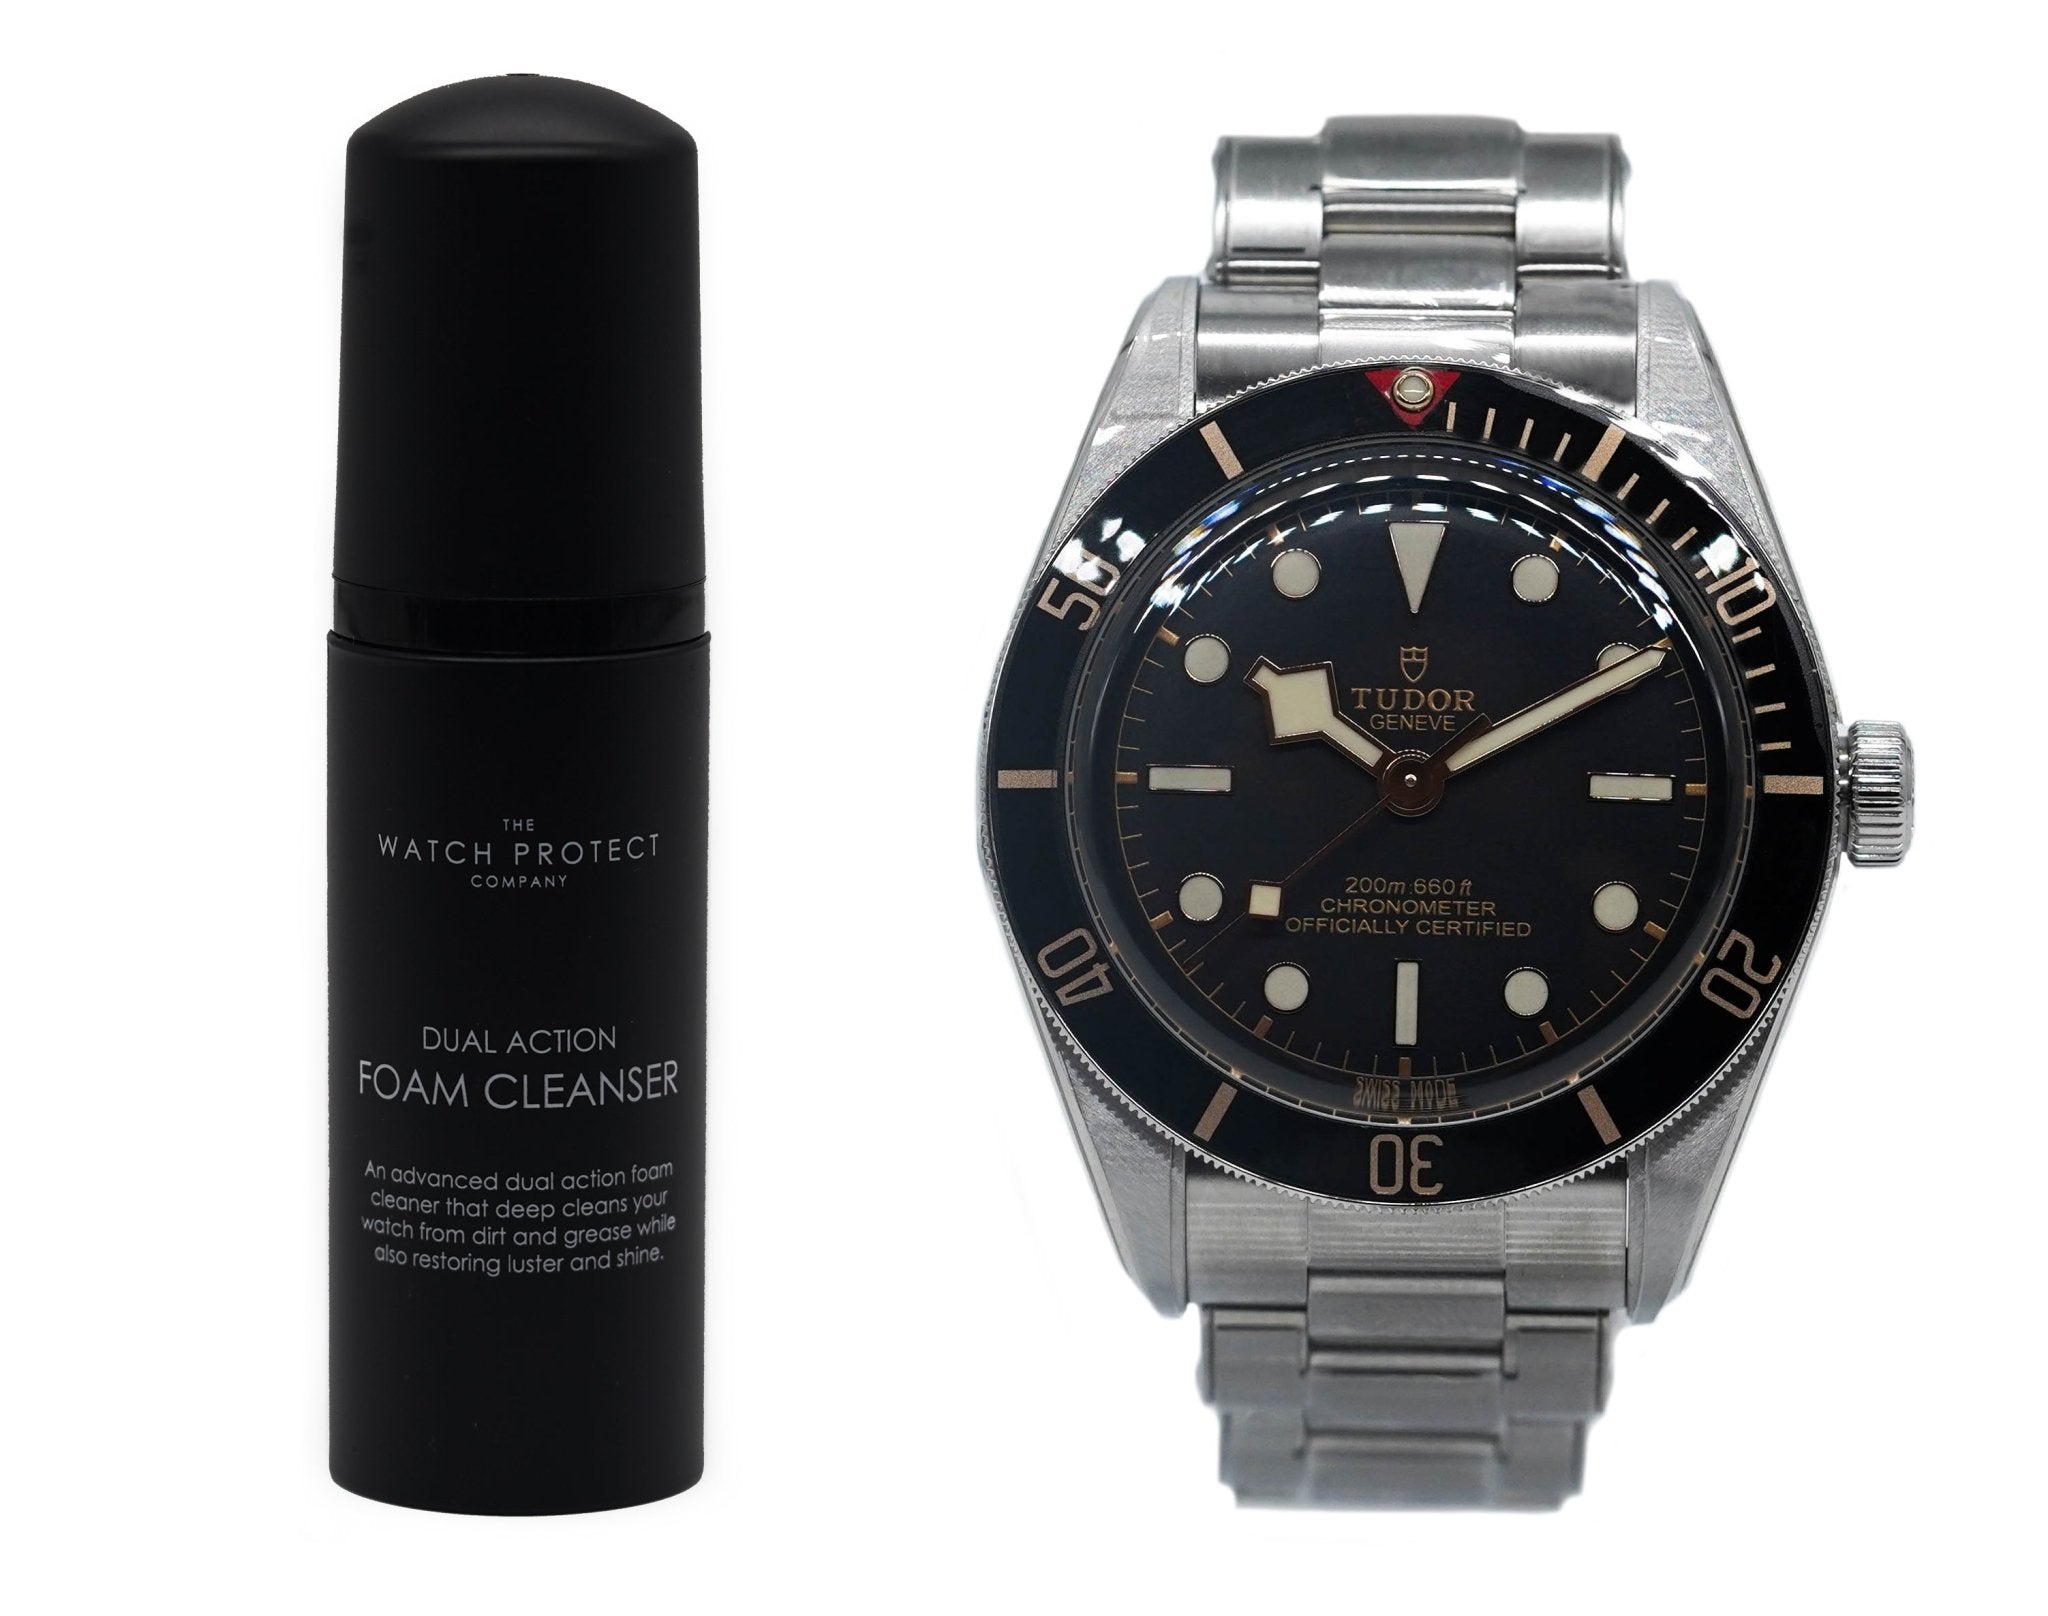 DUAL ACTION FOAM CLEANER & TUDOR BLACK BAY 58 - TIER 3 - WATCH PROTECTION KIT BUNDLE - The Watch Protect Company